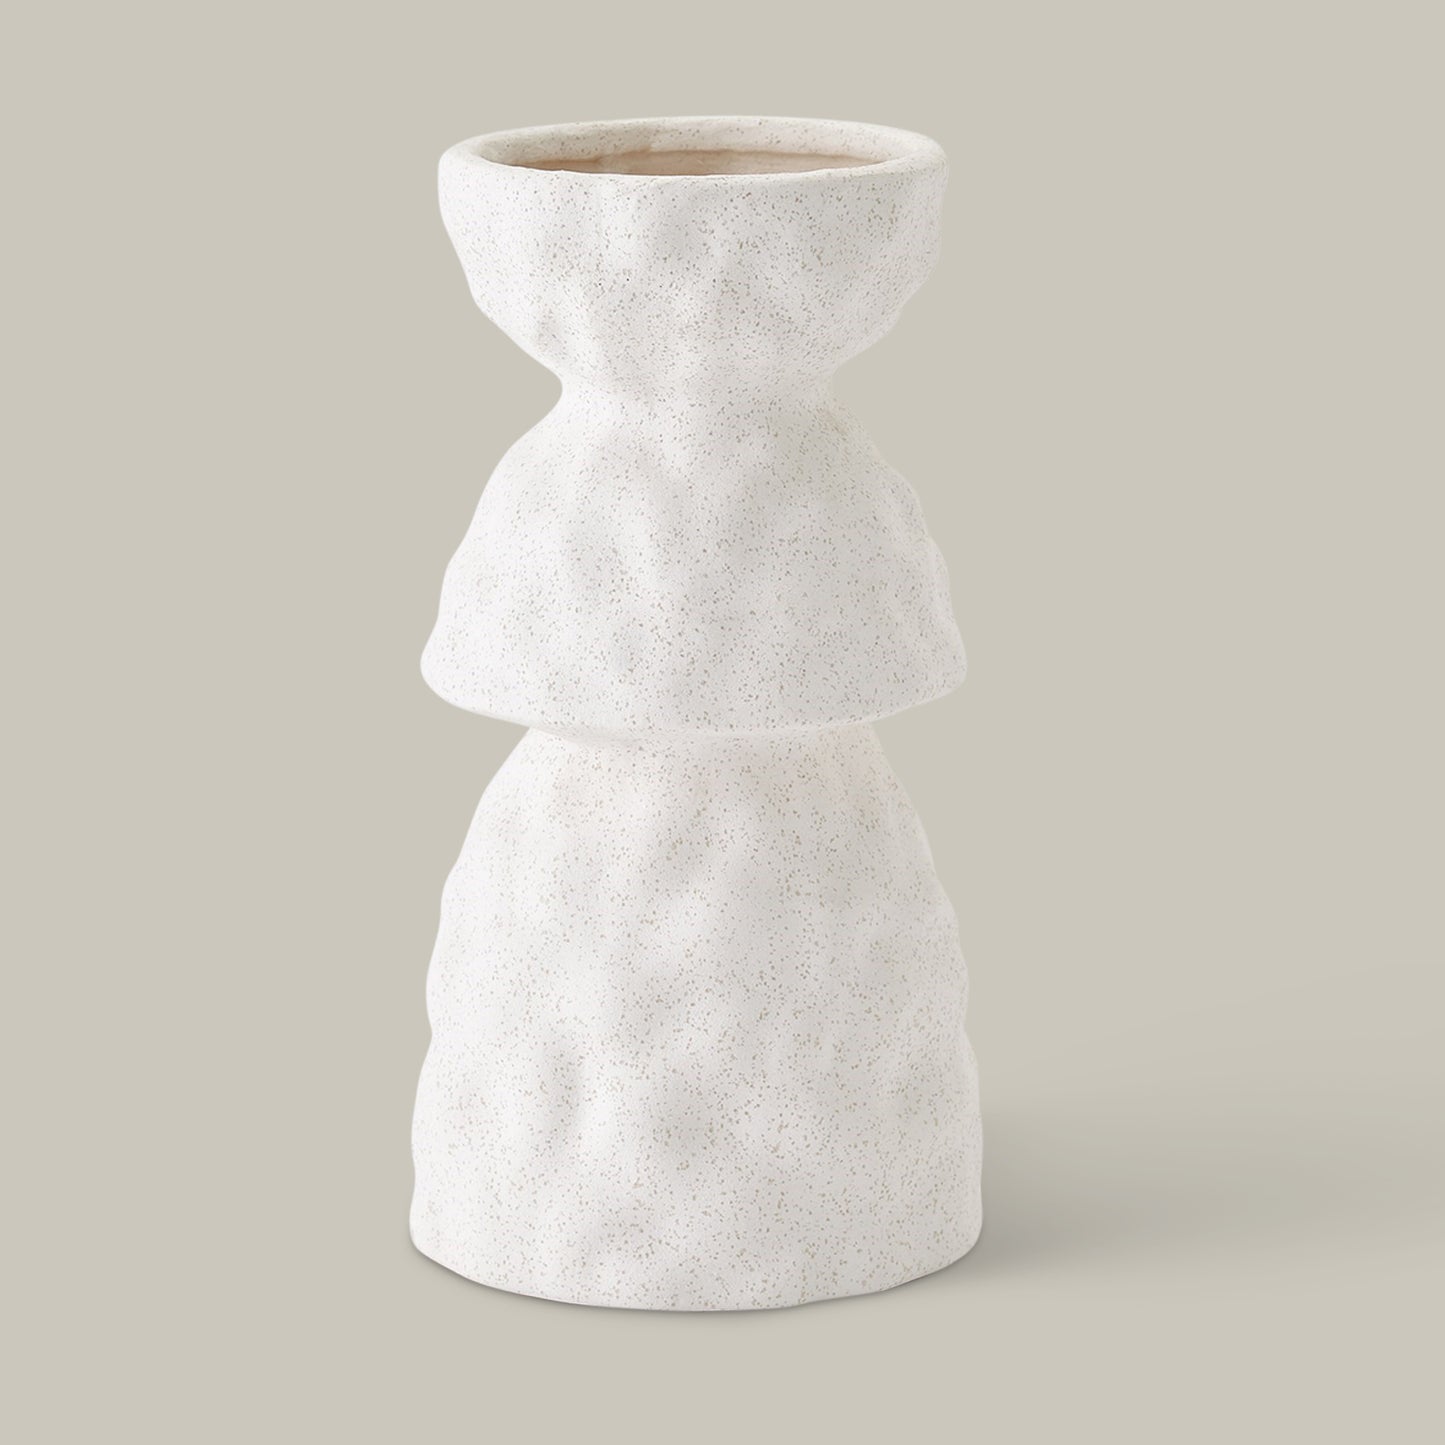 ÉTIENNE AND ANTOINE VASE COLLECTION (Volcanic White)